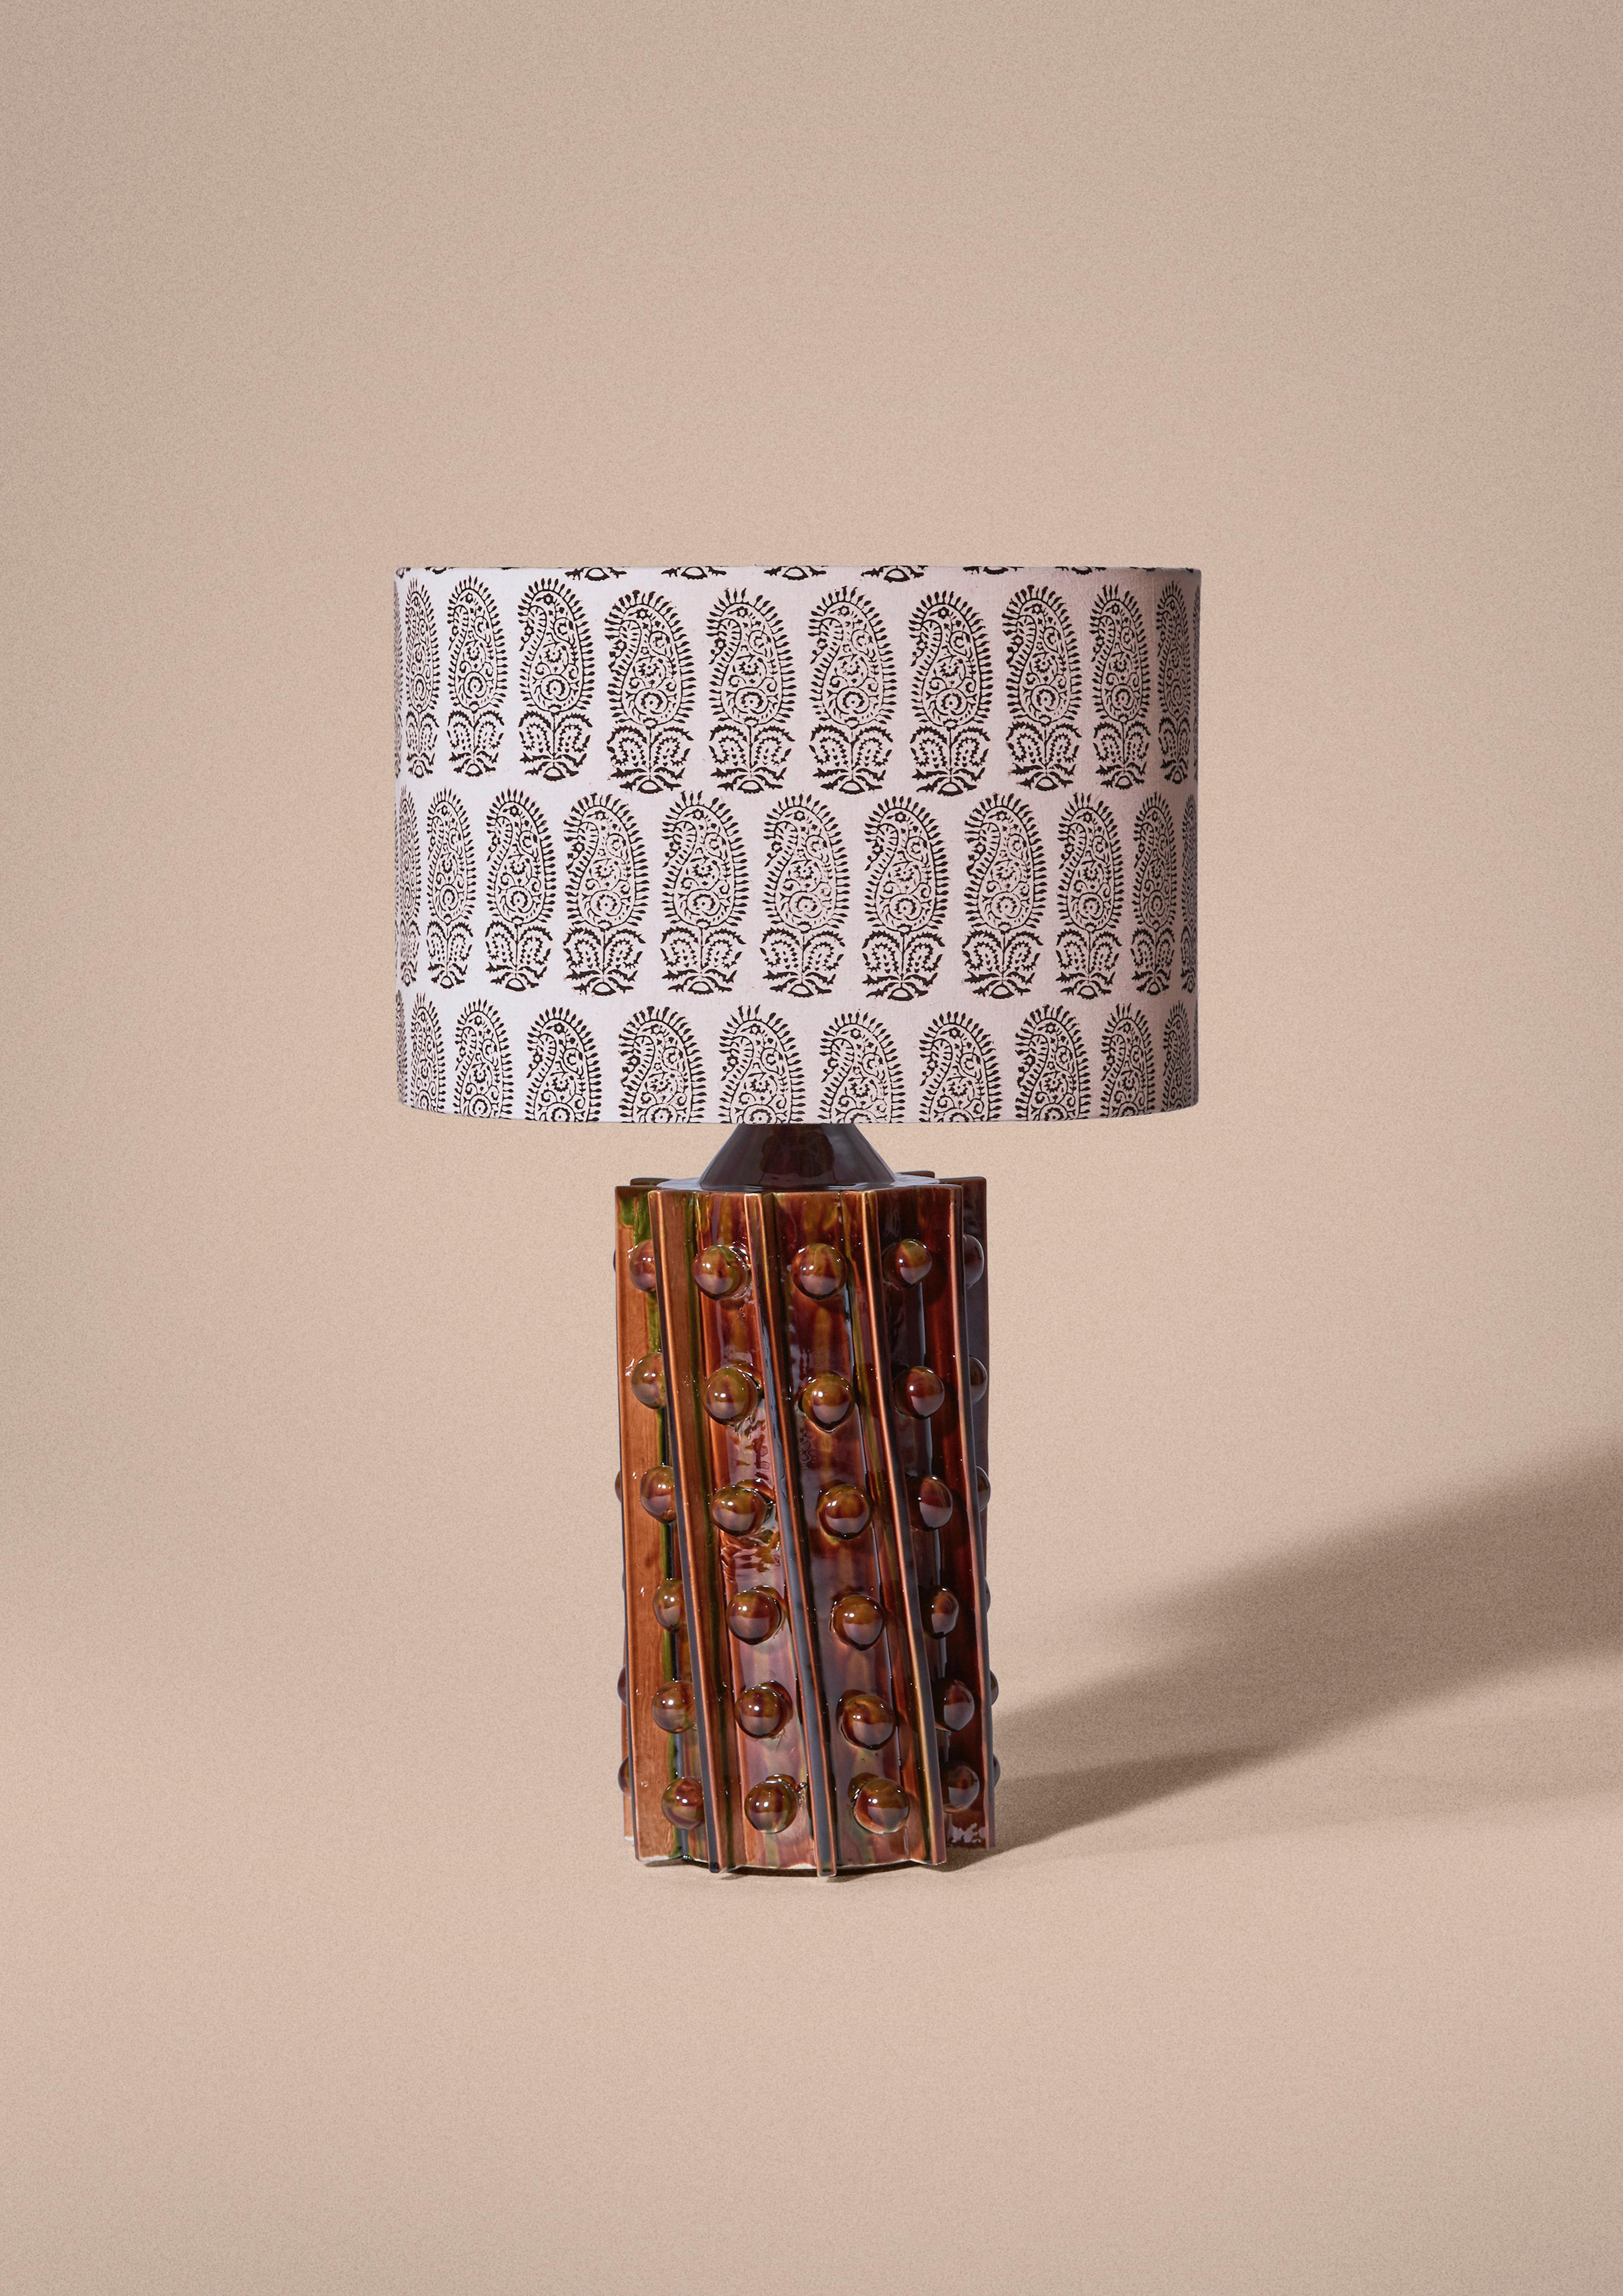 Ceramic foot with geometric relief produced by the Jean Roger workshop in Paris. Available in different colors for the foot, and different fabrics for the oval lampshade. All is crafted in Paris.